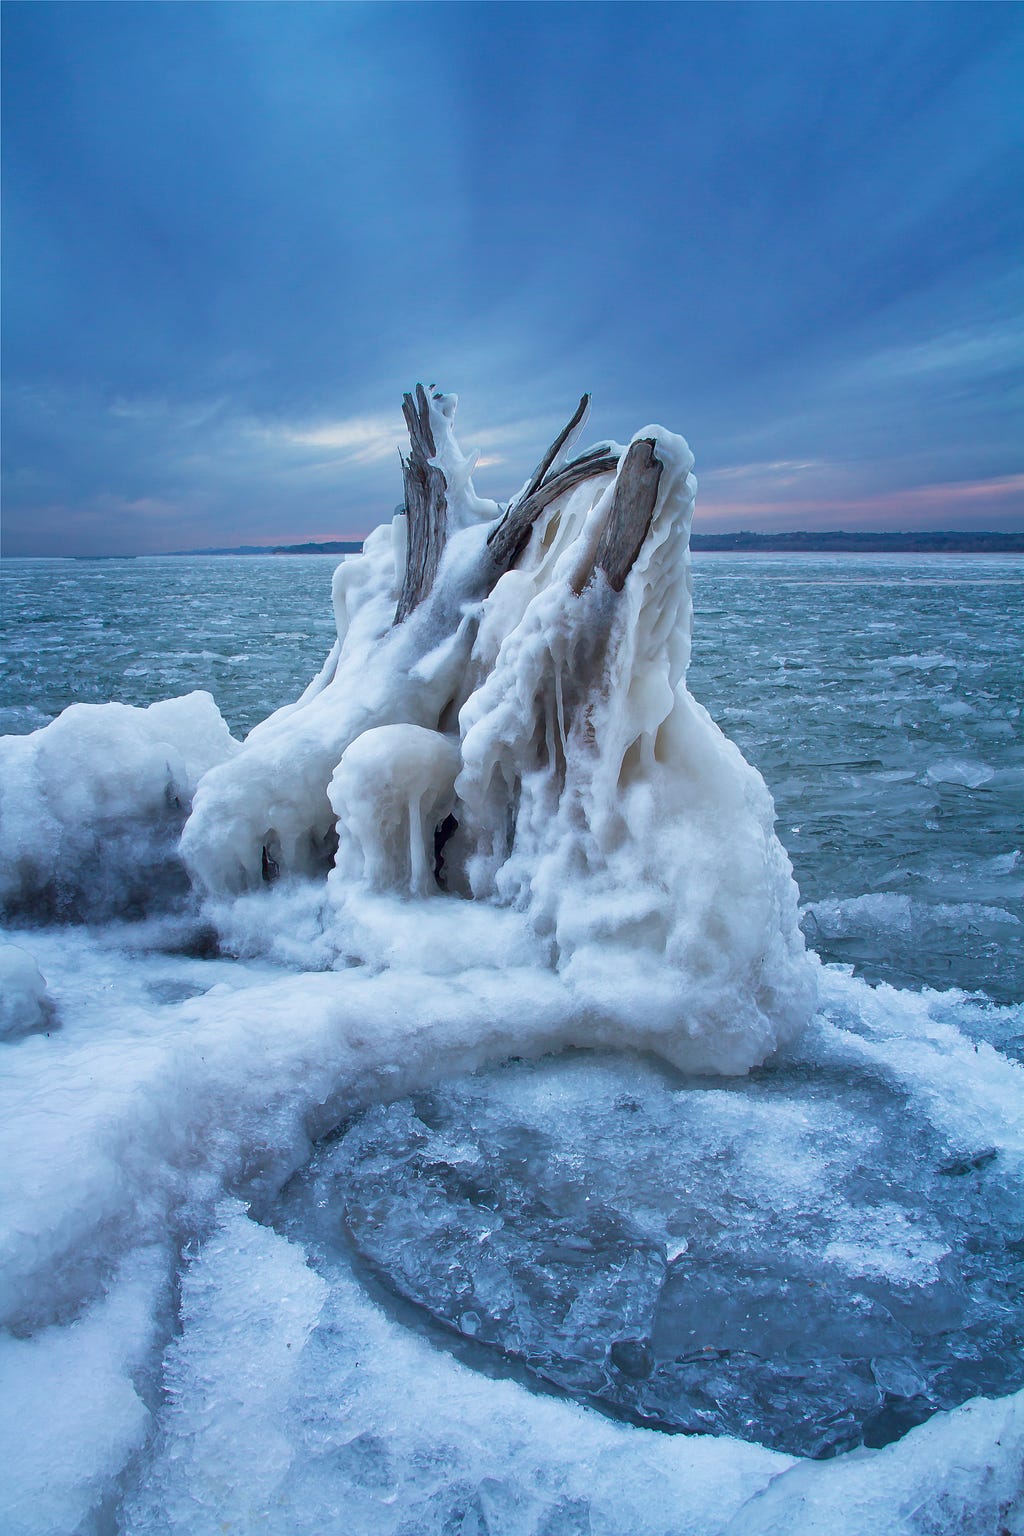 A stump of driftwood covered in ice and snow surrounded by a frozen lake with blue clouds and sunset.